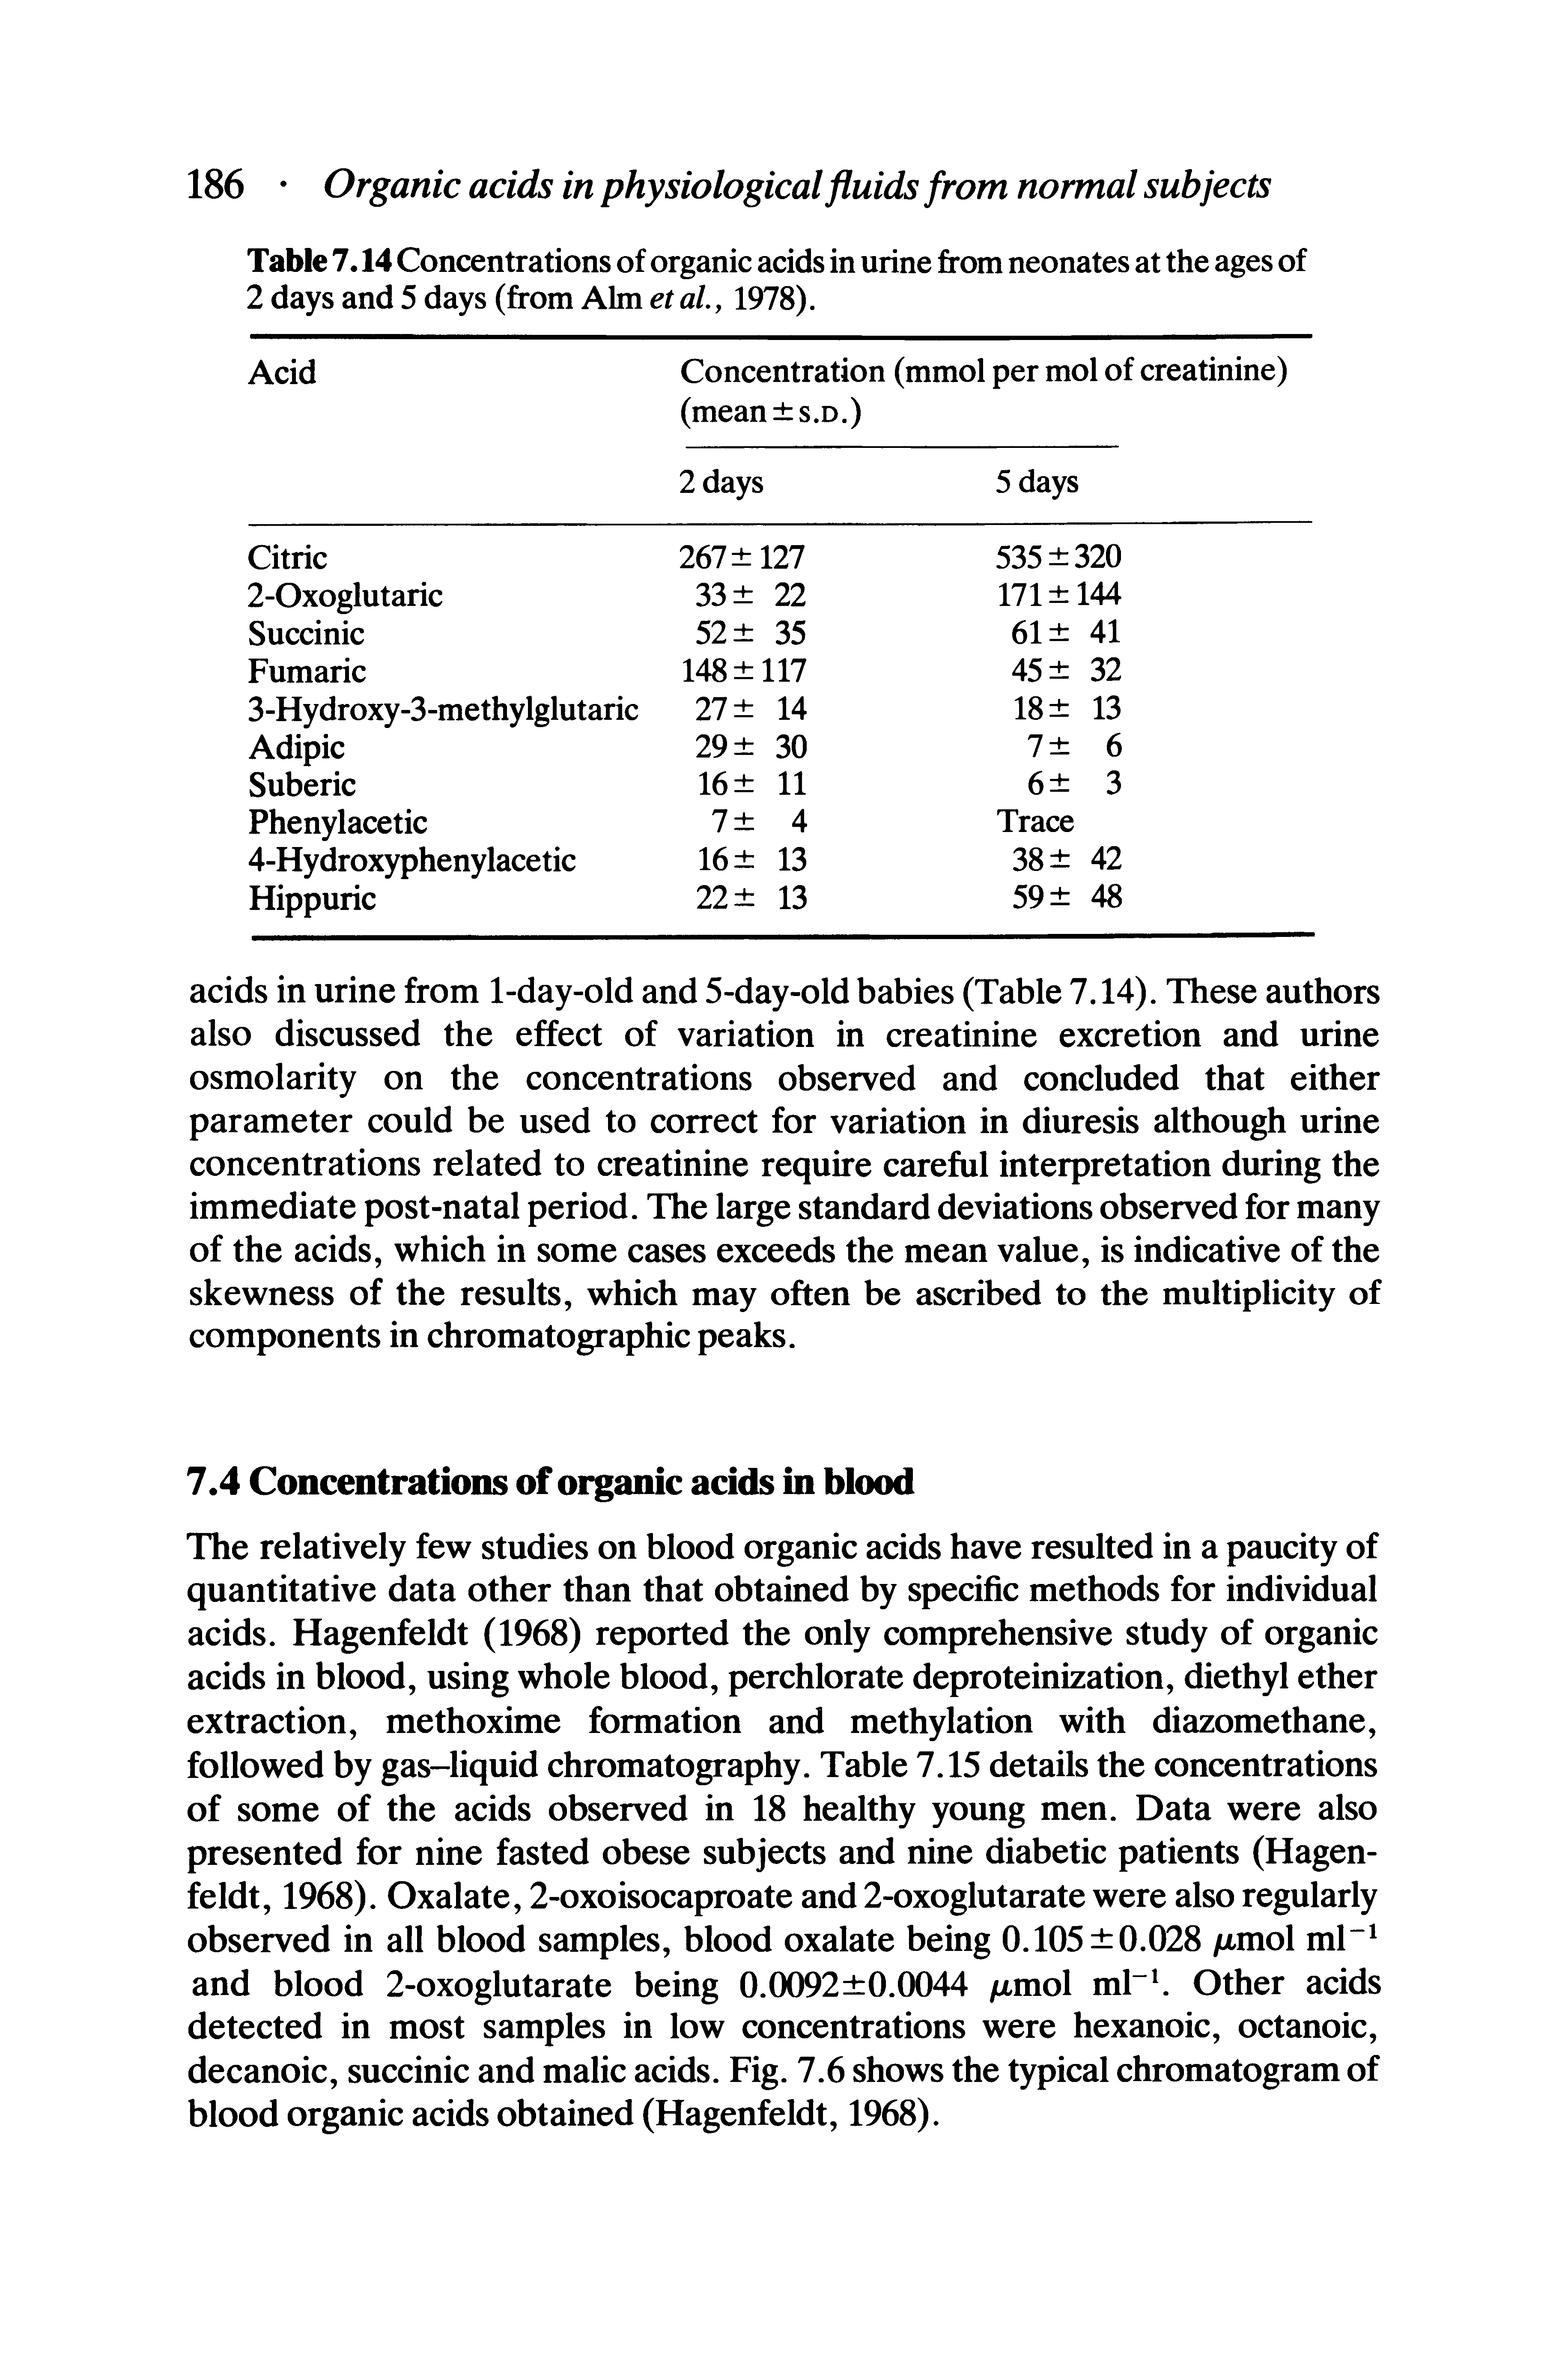 Table 7.14 Concentrations of organic acids in urine from neonates at the ages of 2 days and 5 days (from Aim et aL, 1978).